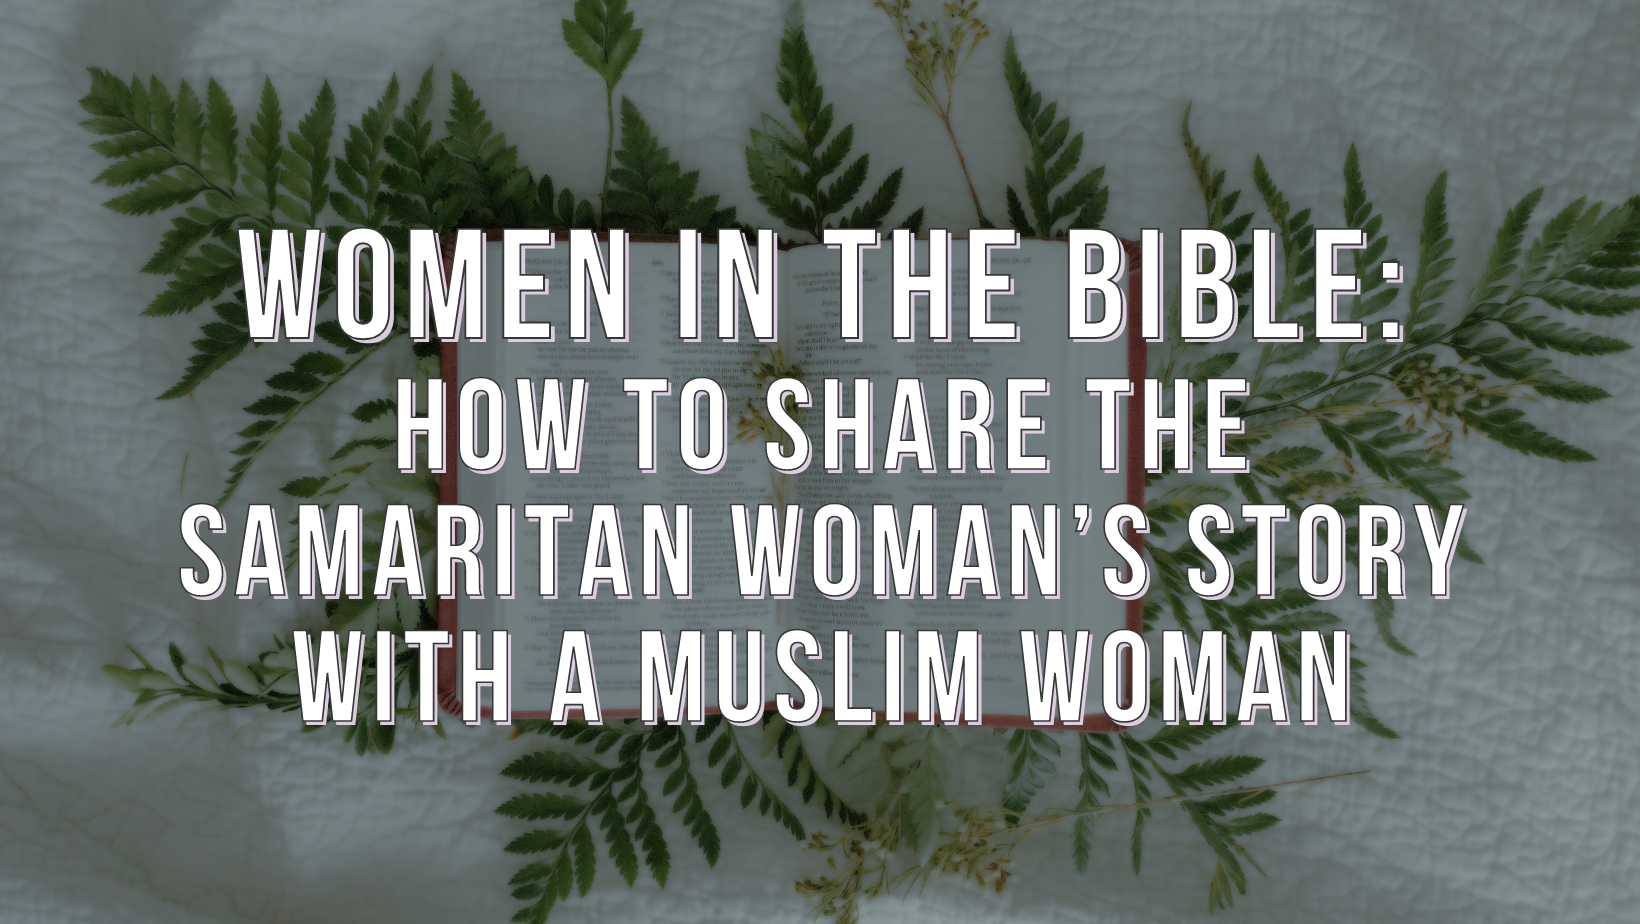 Women in the Bible: How to share the Samaritan woman’s story with a Muslim woman